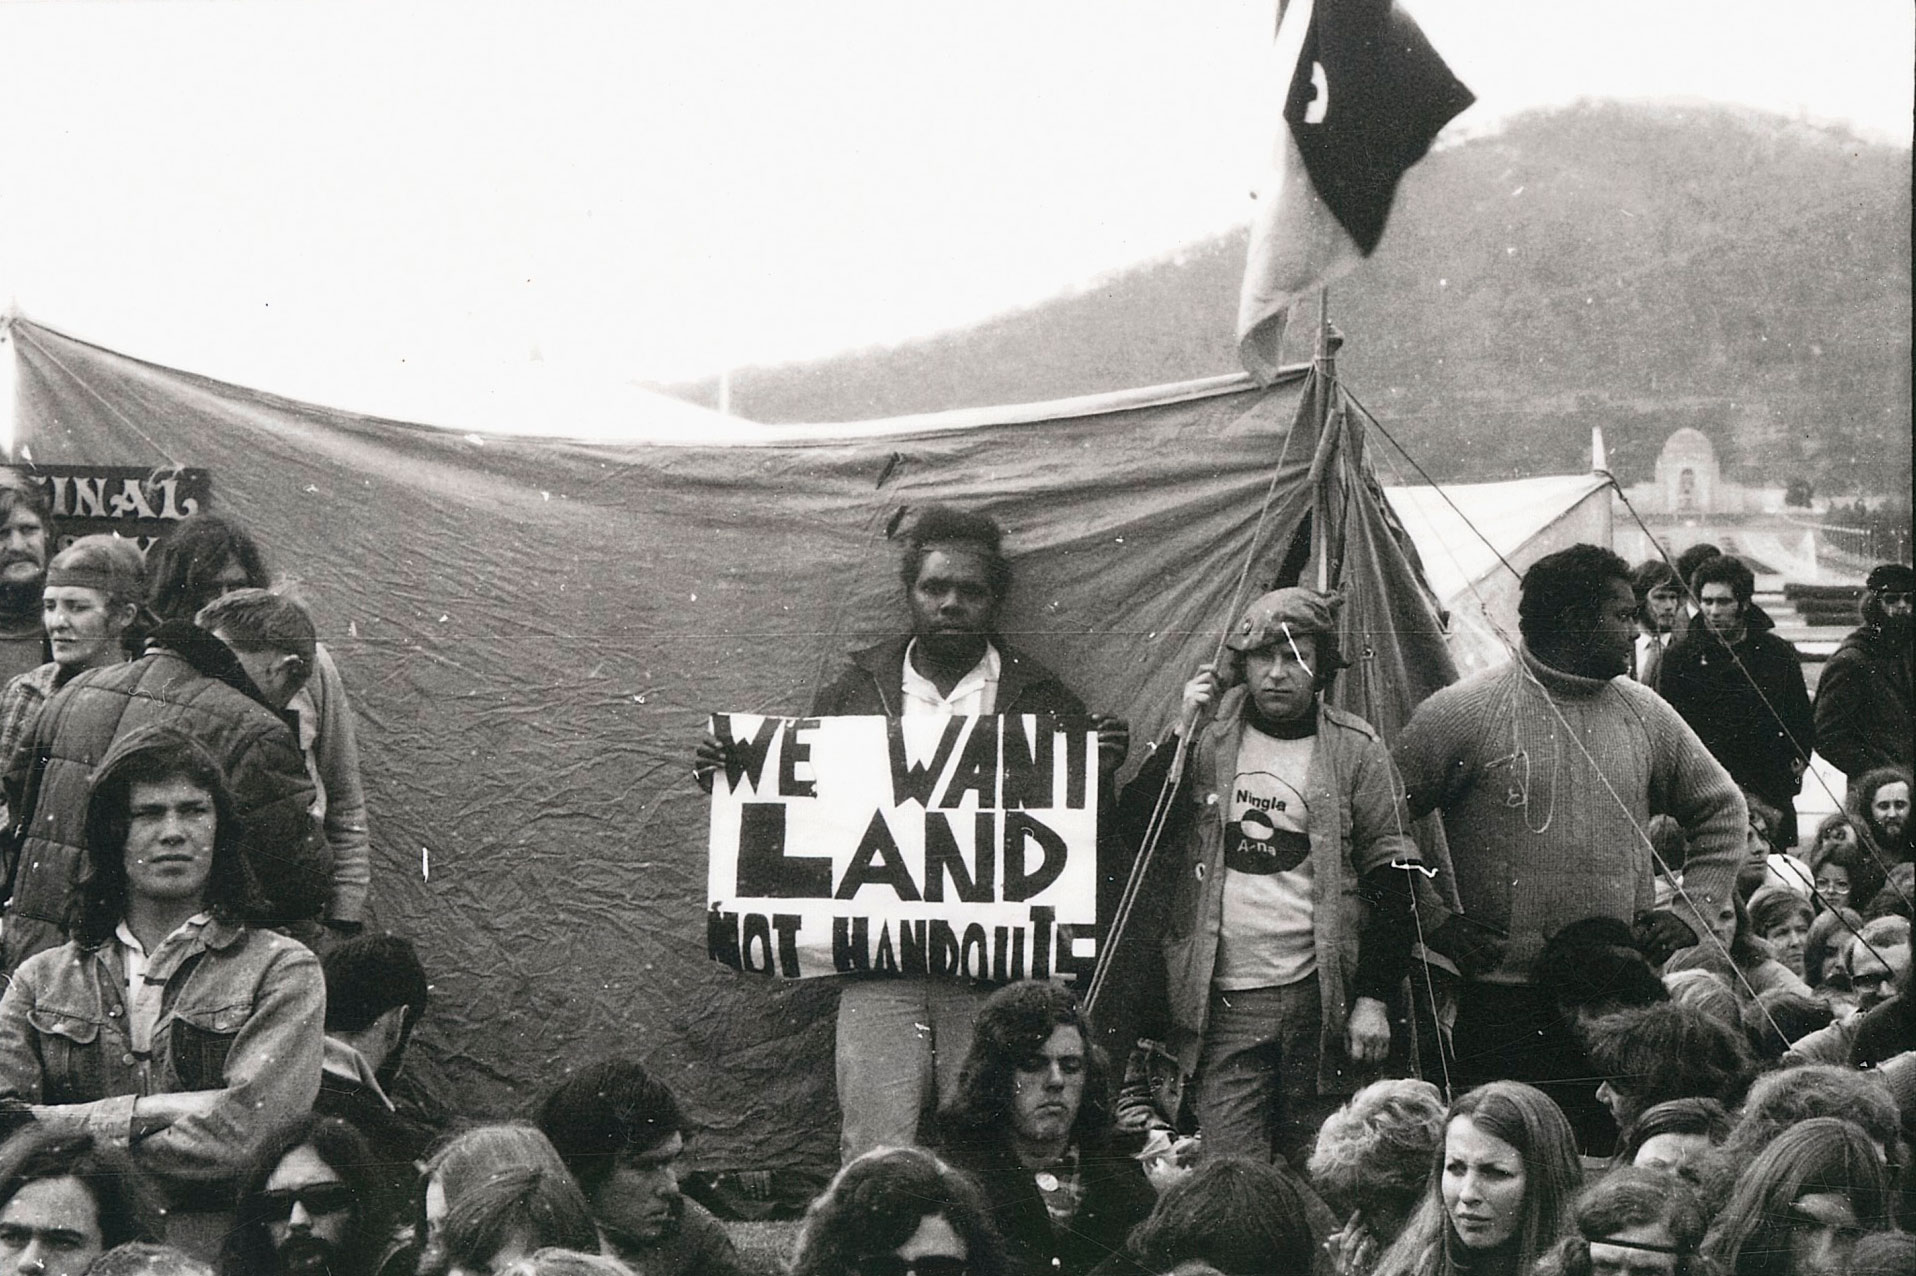 “We want land, not handouts”–> The Tent Embassy